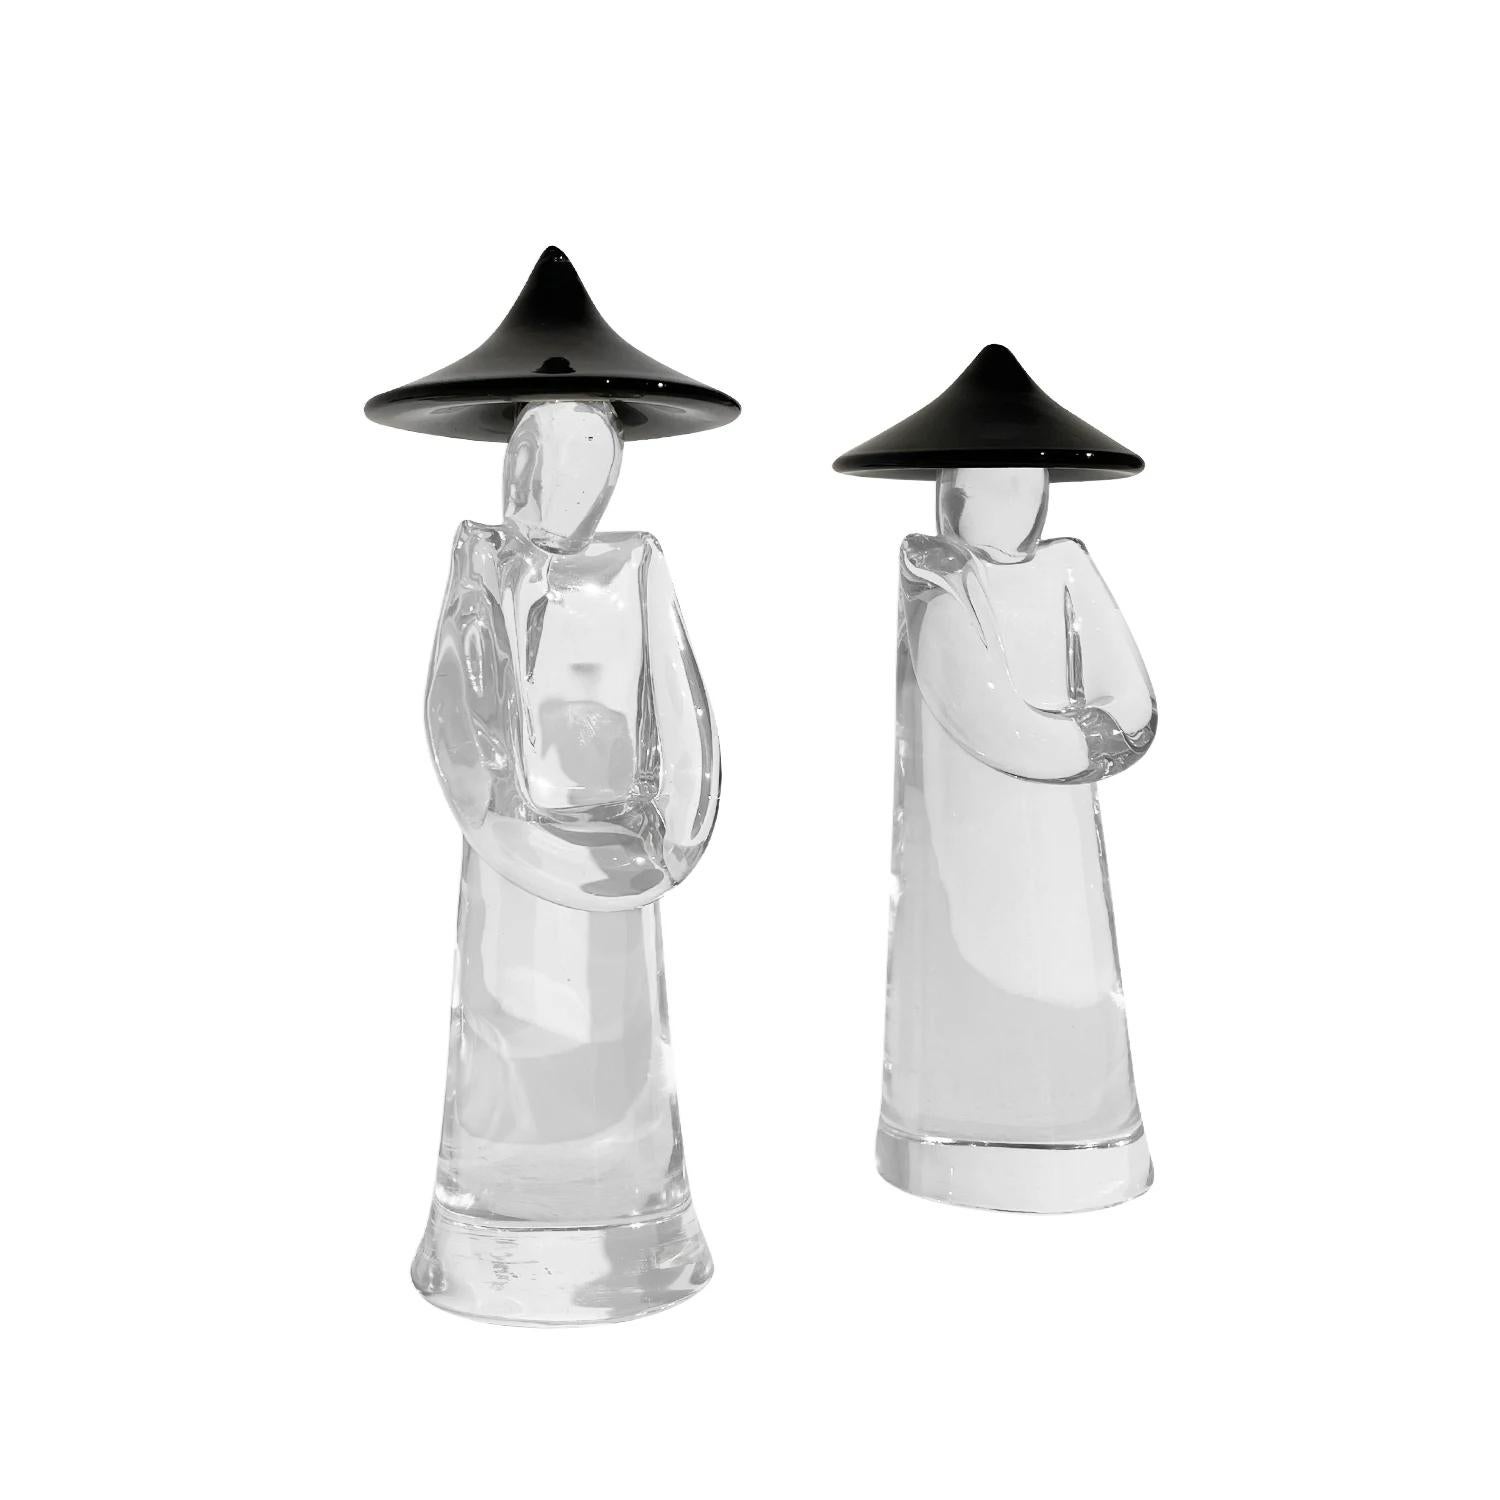 A vintage Mid-Century Modern Italian pair of Japanese farmers with a large black hat made of hand blown clear Murano glass, designed and produced by Pino Signoretto in good condition. The detailed décor pieces represent a woman and man. Signed at